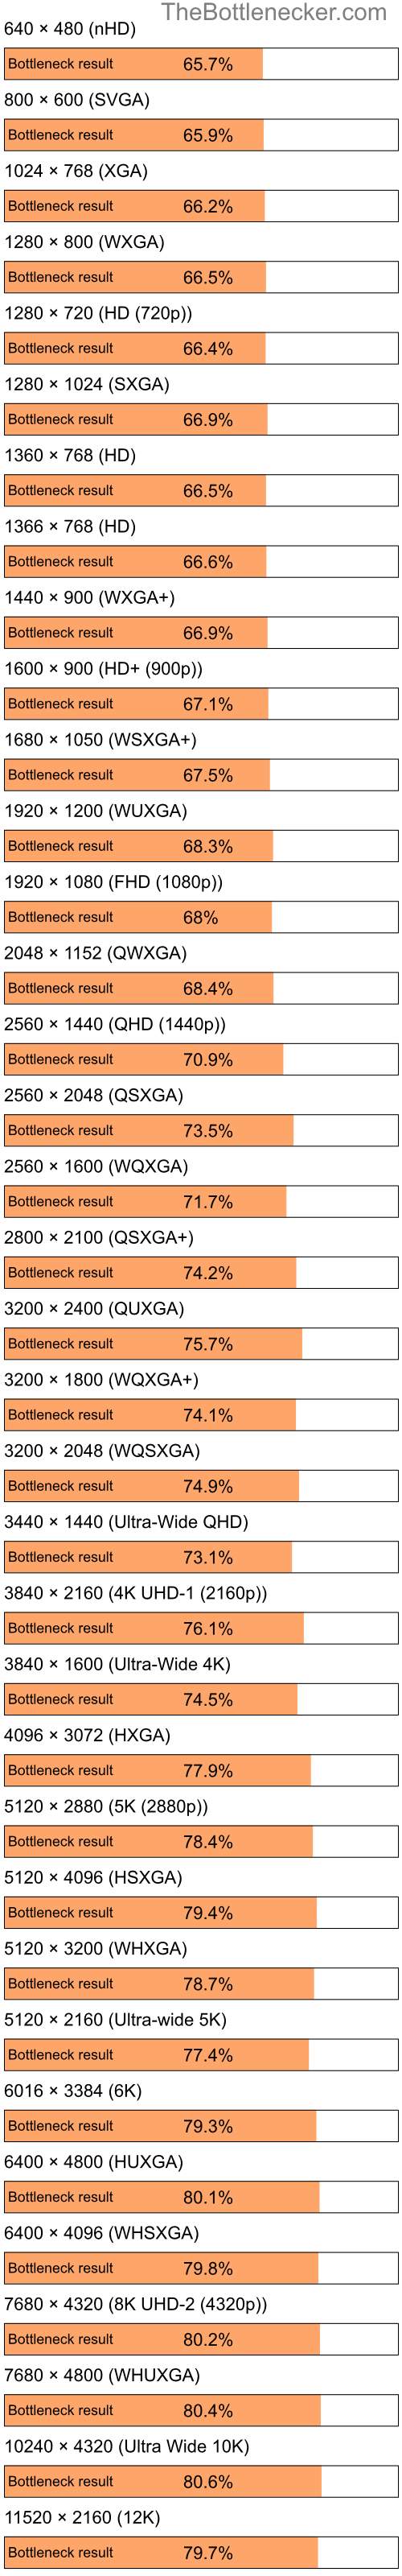 Bottleneck results by resolution for Intel Atom N270 and AMD Mobility Radeon HD 2300 in Processor Intense Tasks